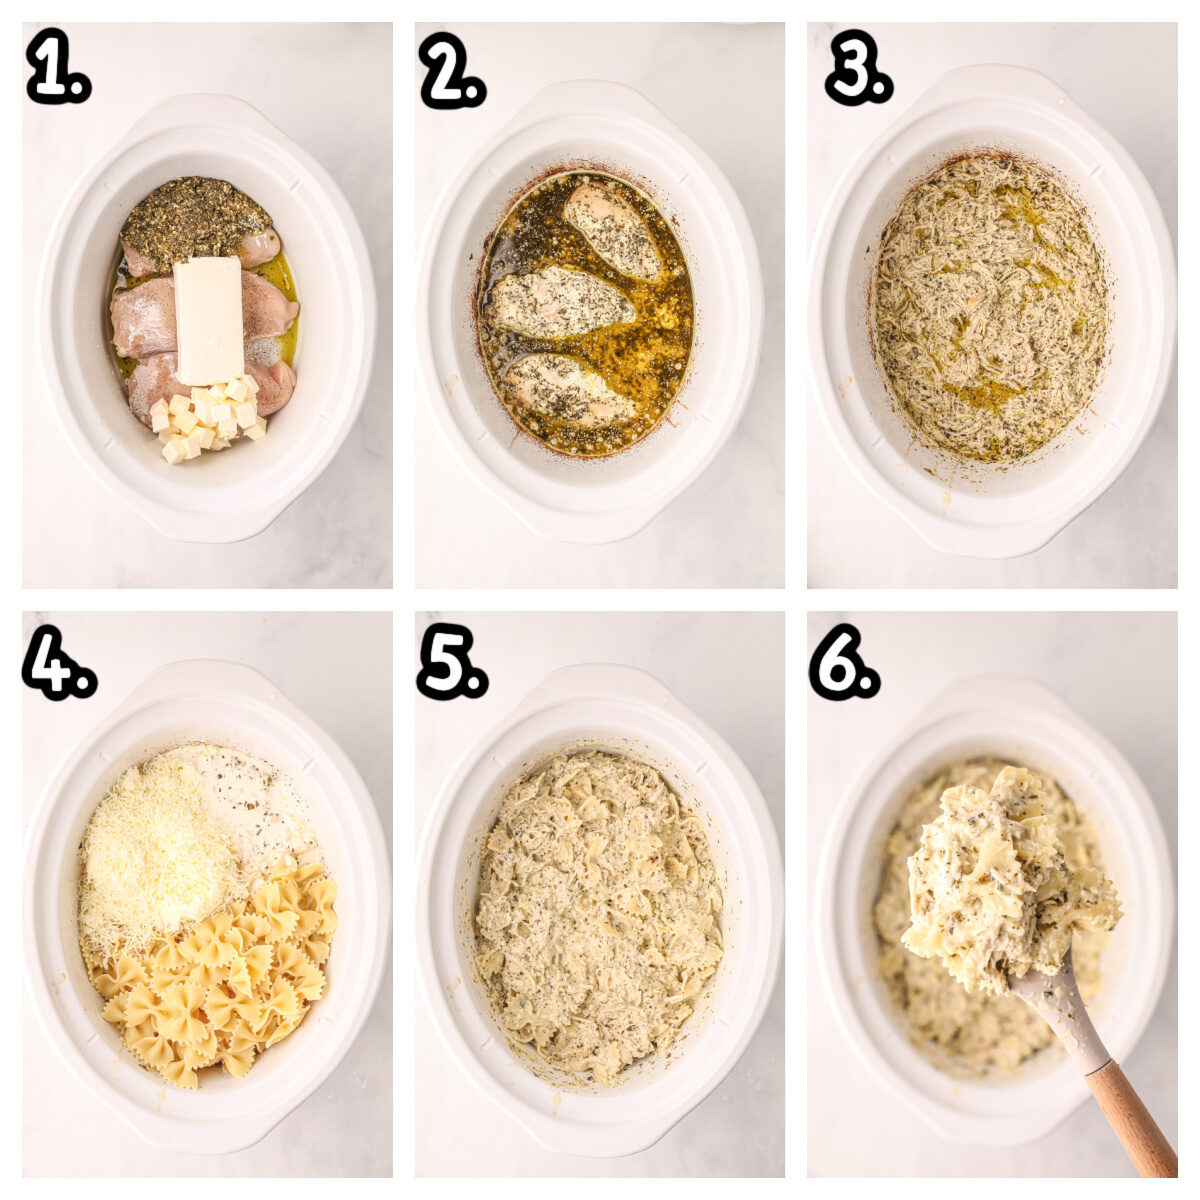 6 images of how to make pesto pasta in a crockpot.